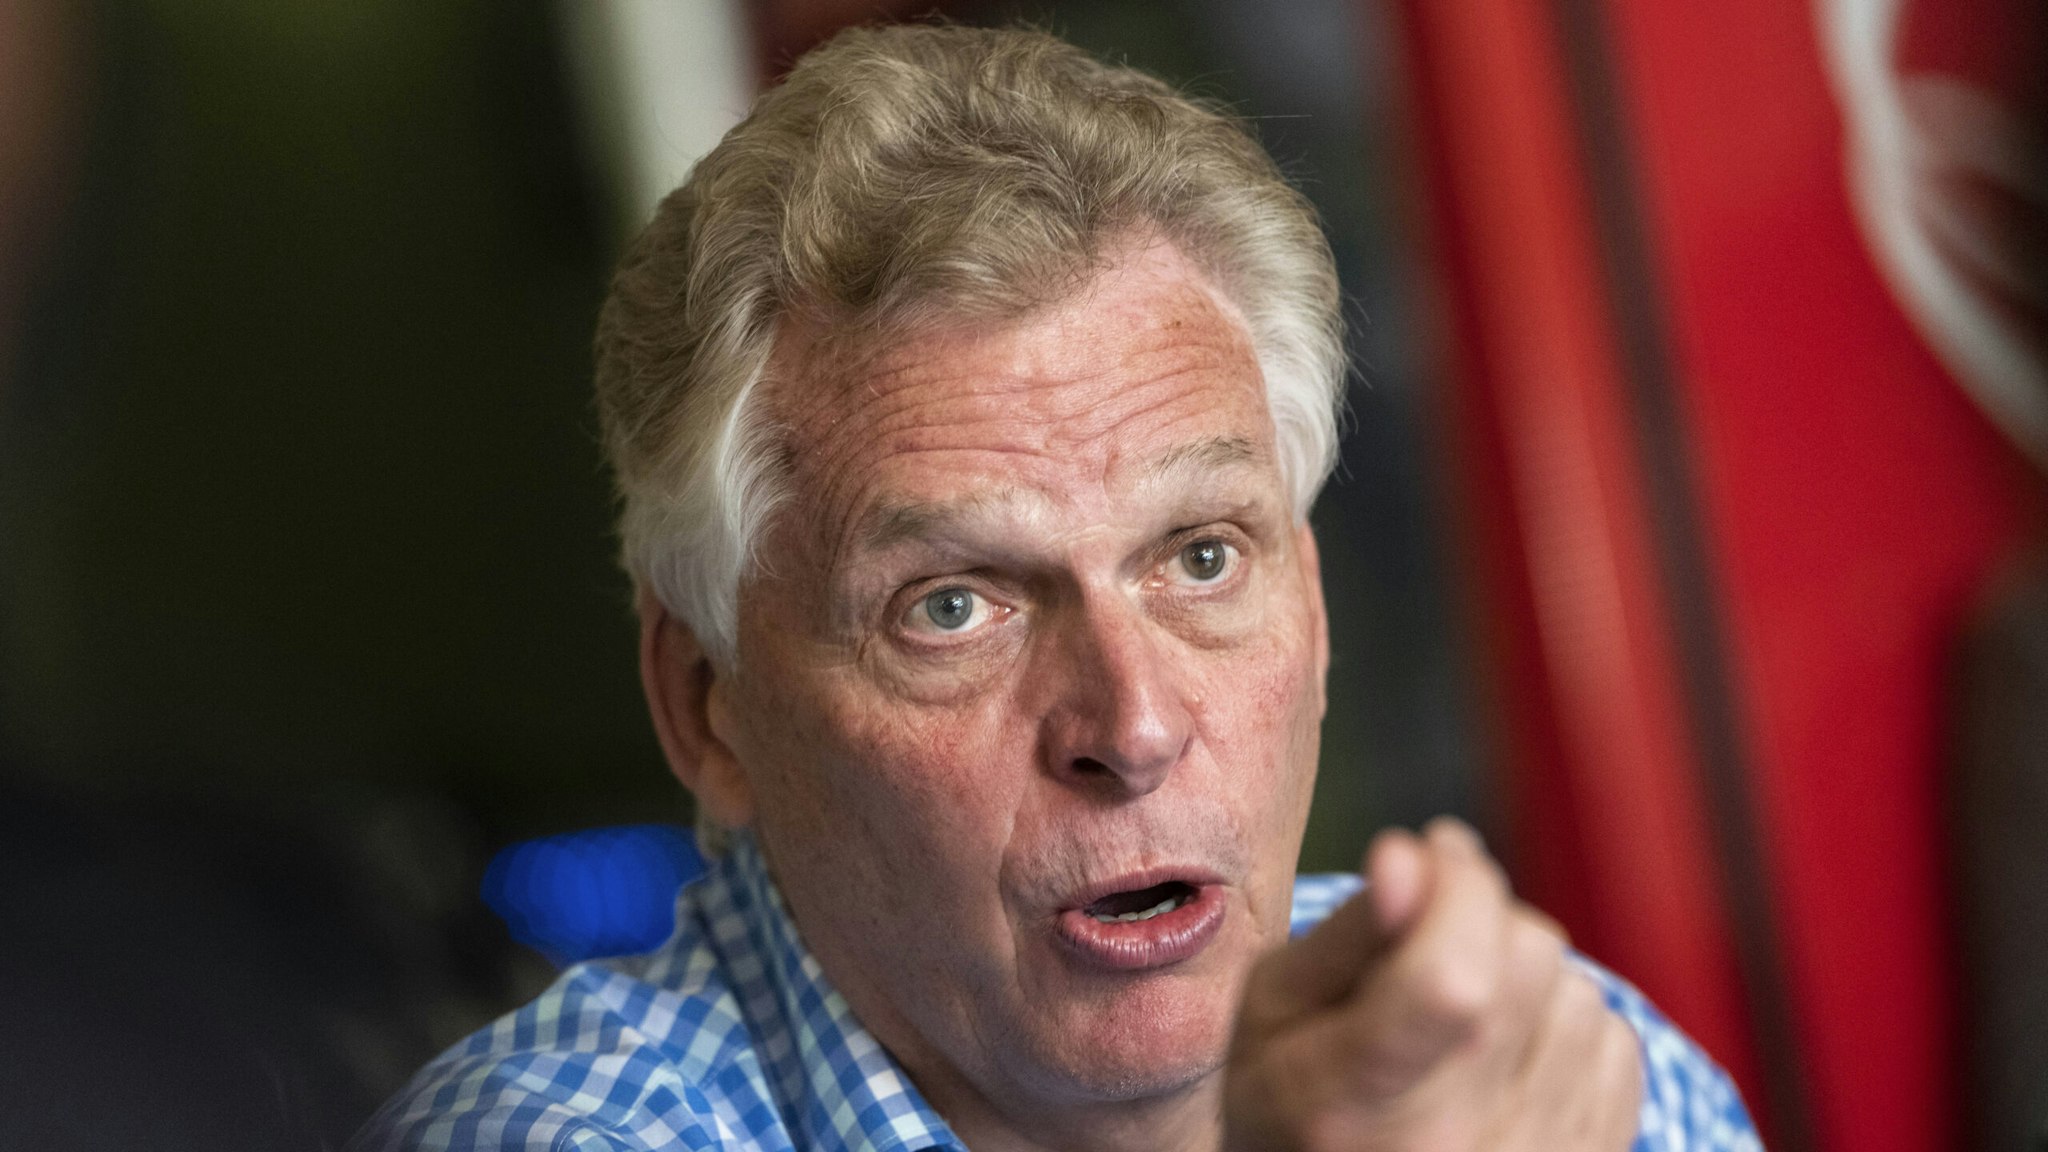 ARLINGTON, VA - OCTOBER 22: Democratic gubernatorial candidate, former Virginia Gov. Terry McAuliffe speaks to supporters at a restaurant October 22, 2021 in Arlington, Virginia. The Virginia gubernatorial election is November 2, where McAuliffe will face Republican candidate Glenn Youngkin.